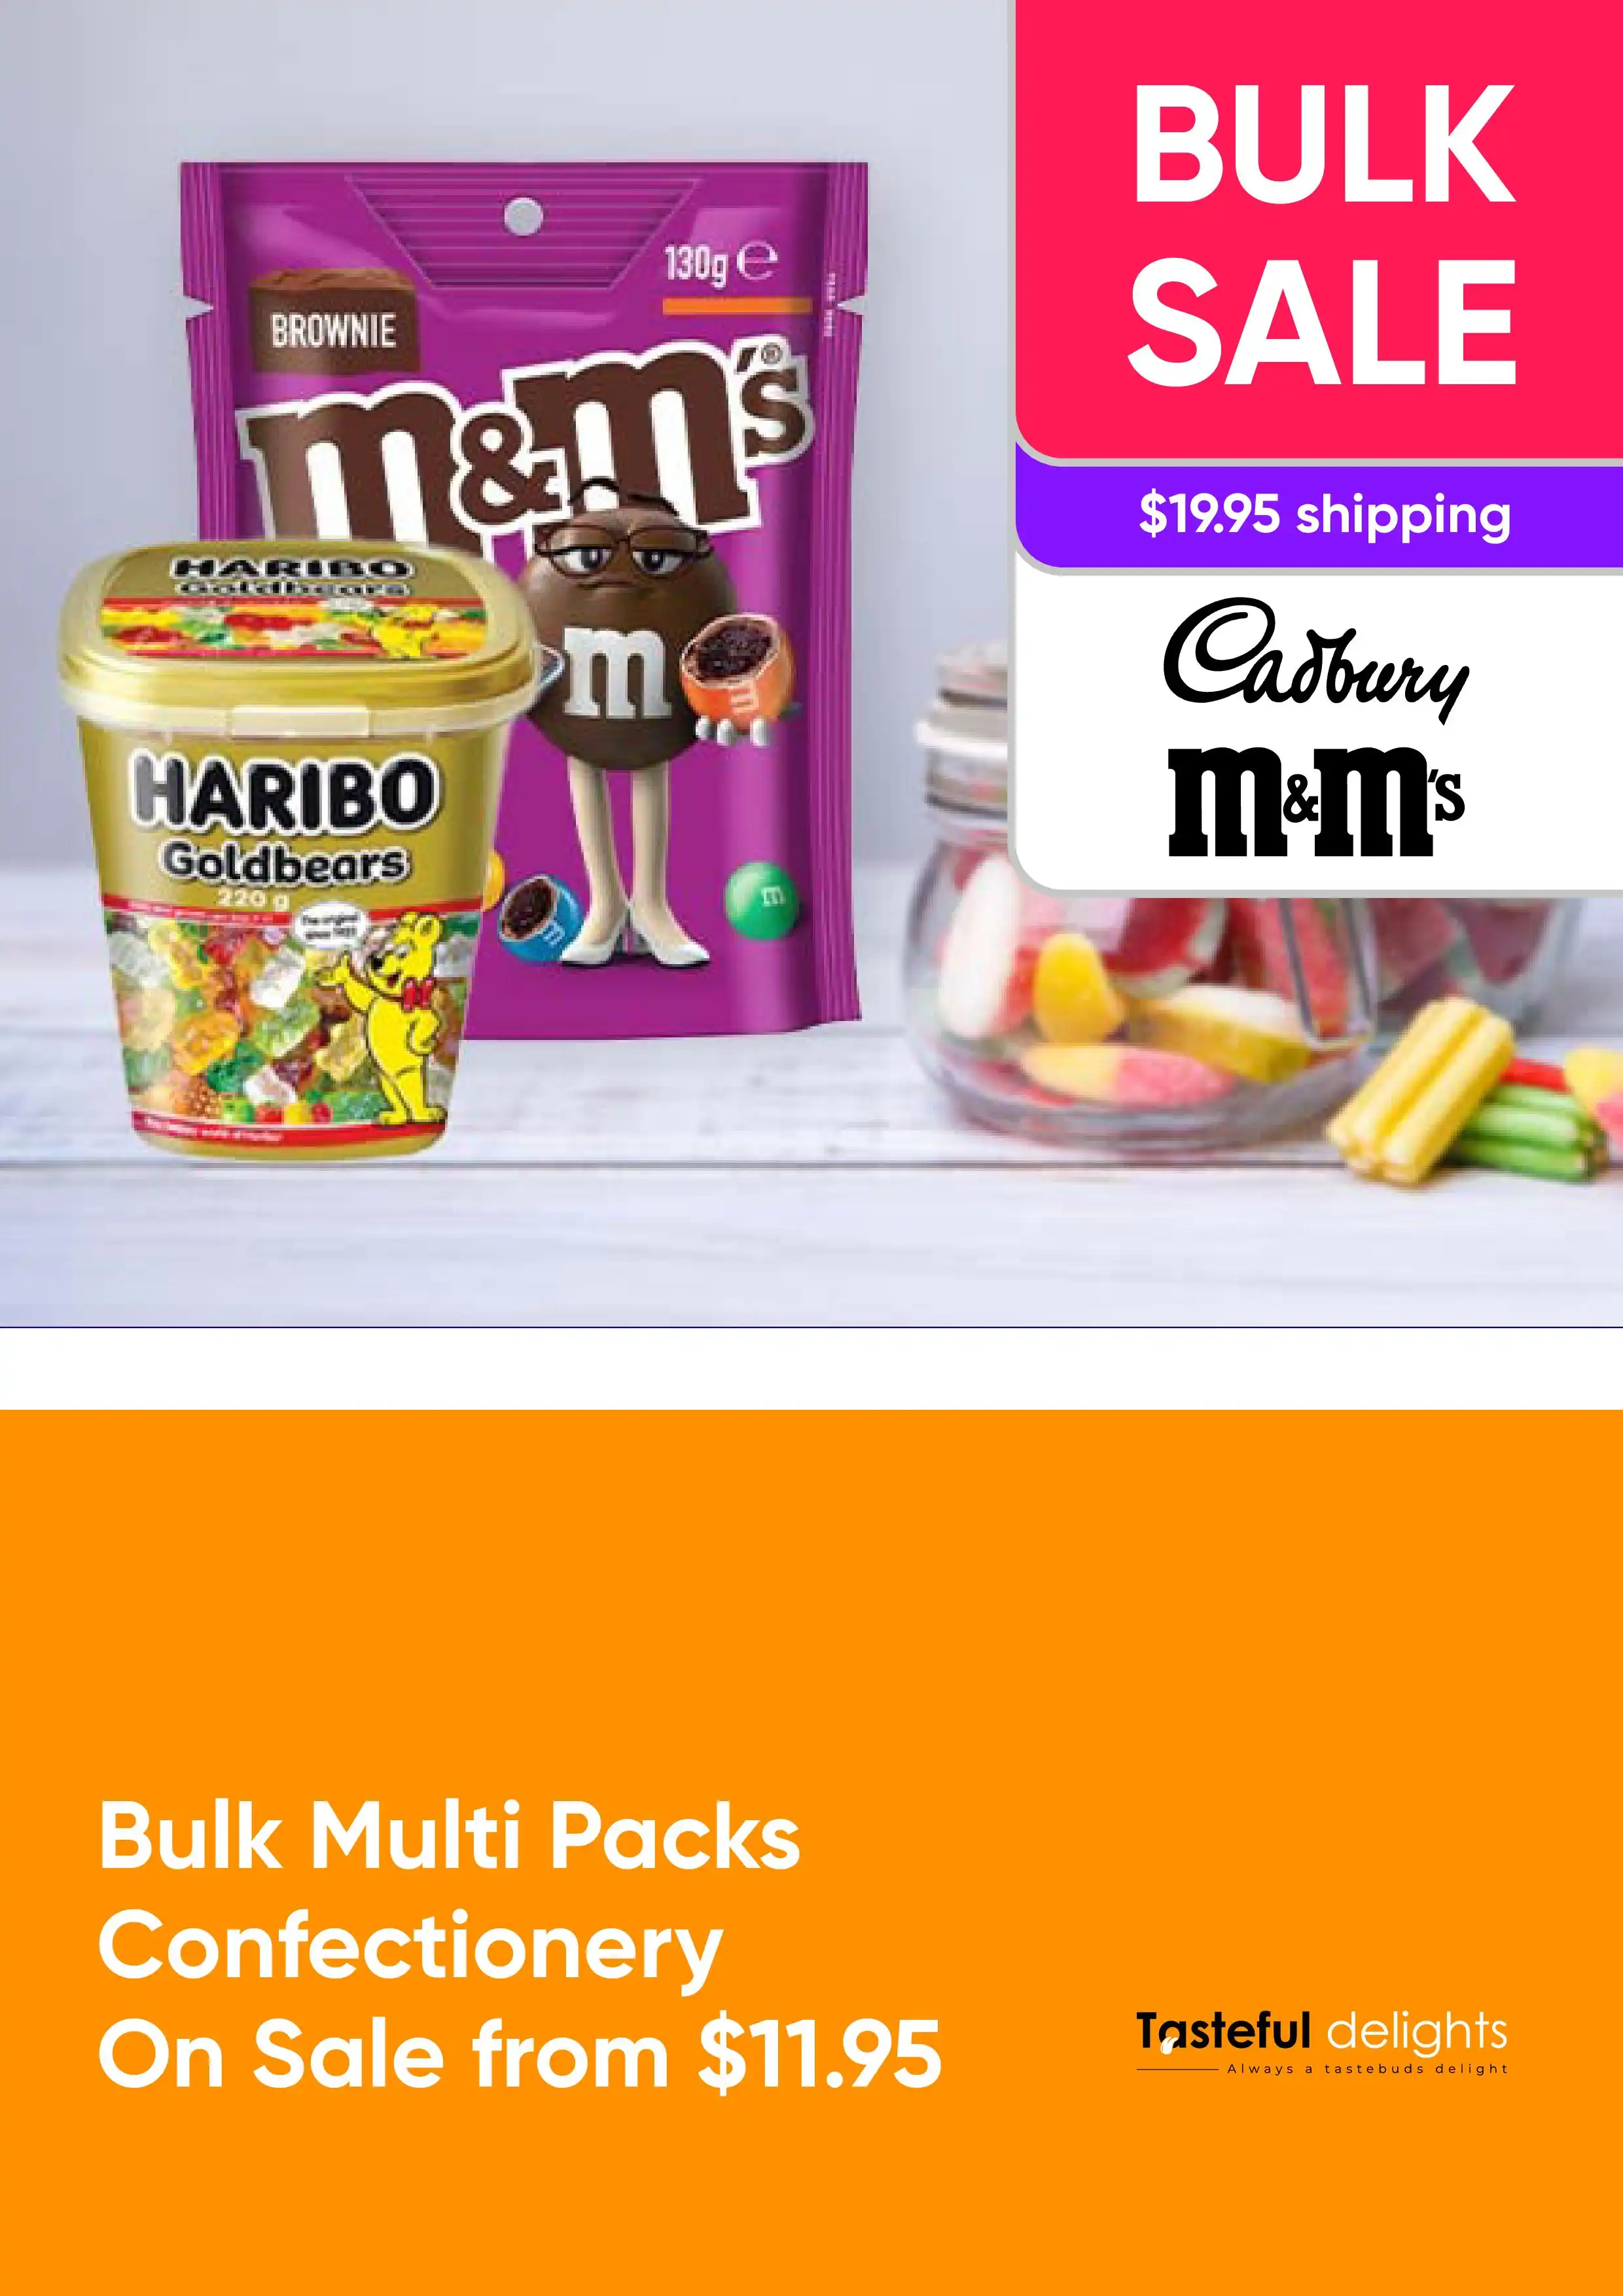 Bulk Multi Packs Confectionery On Sale from $11.95